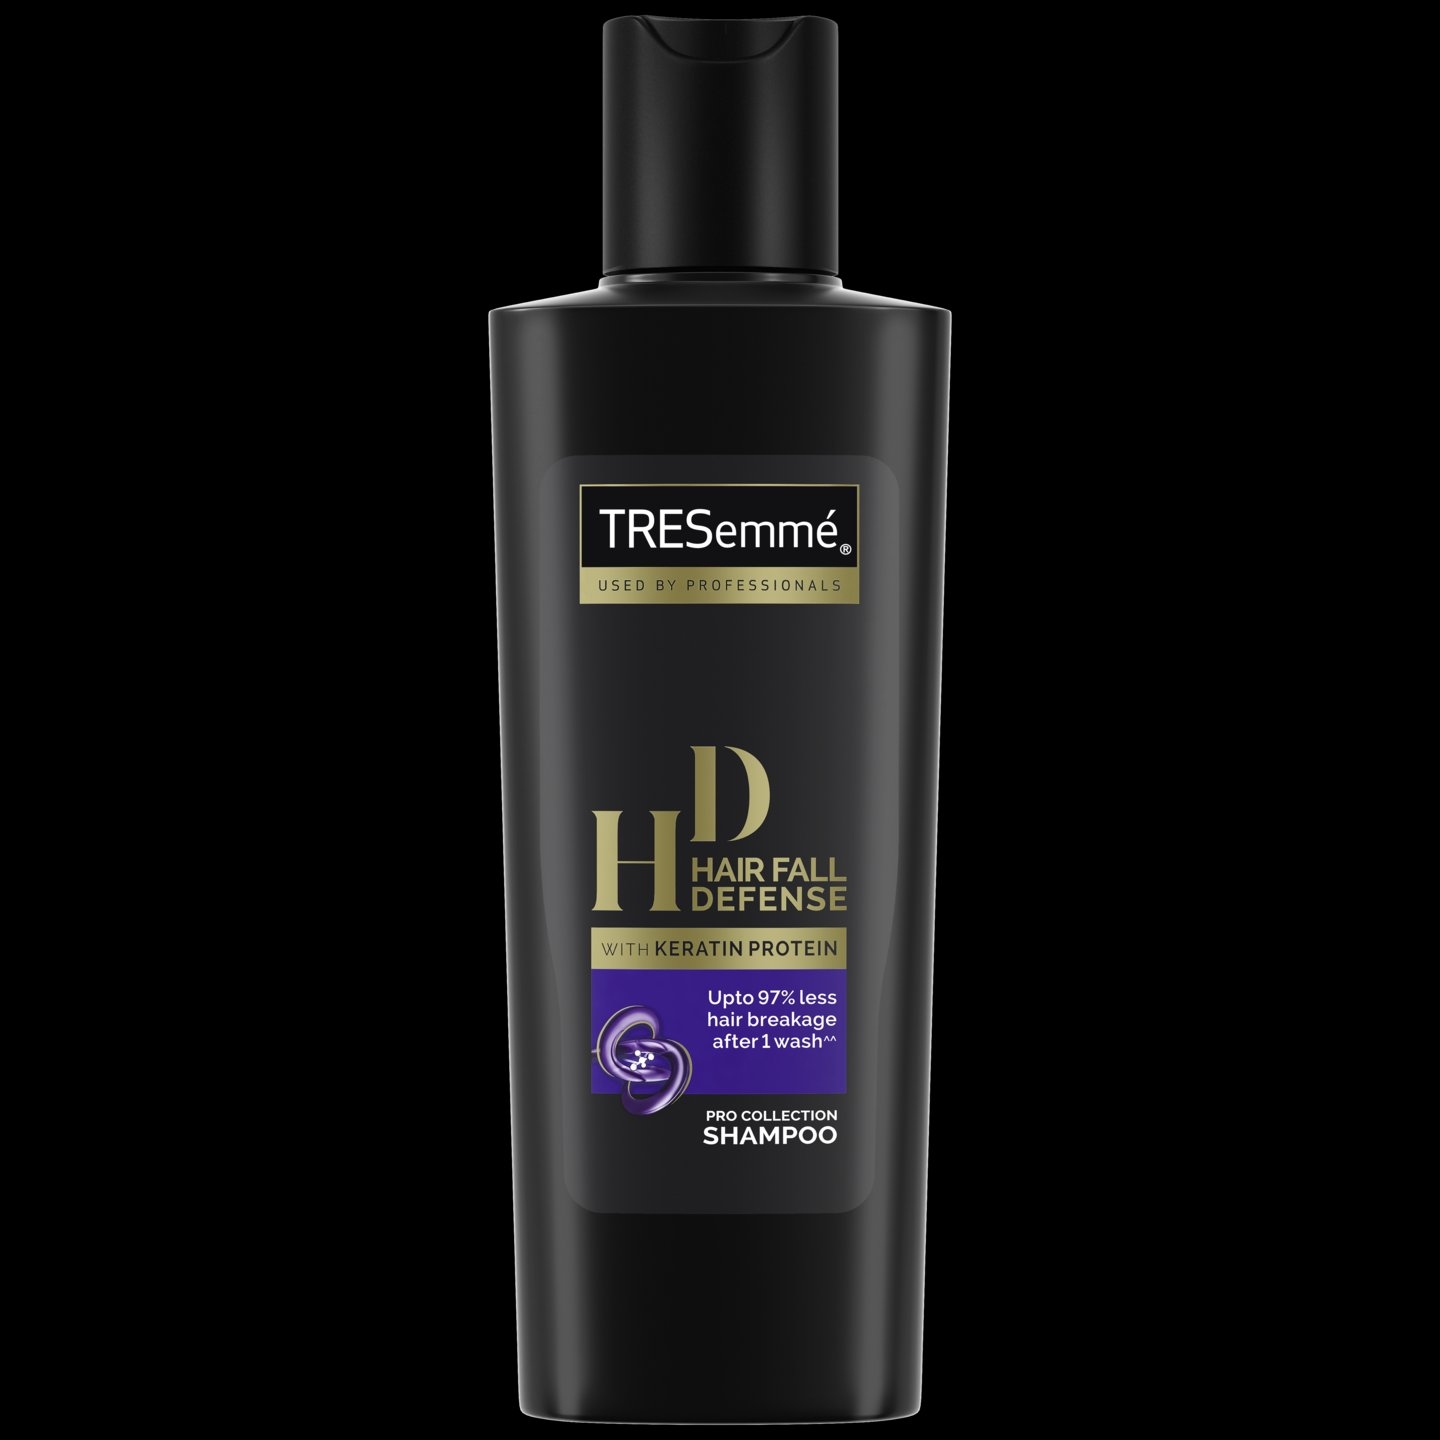 Tresemme Hair Fall Defence Shampoo 1 ltr TheUShop